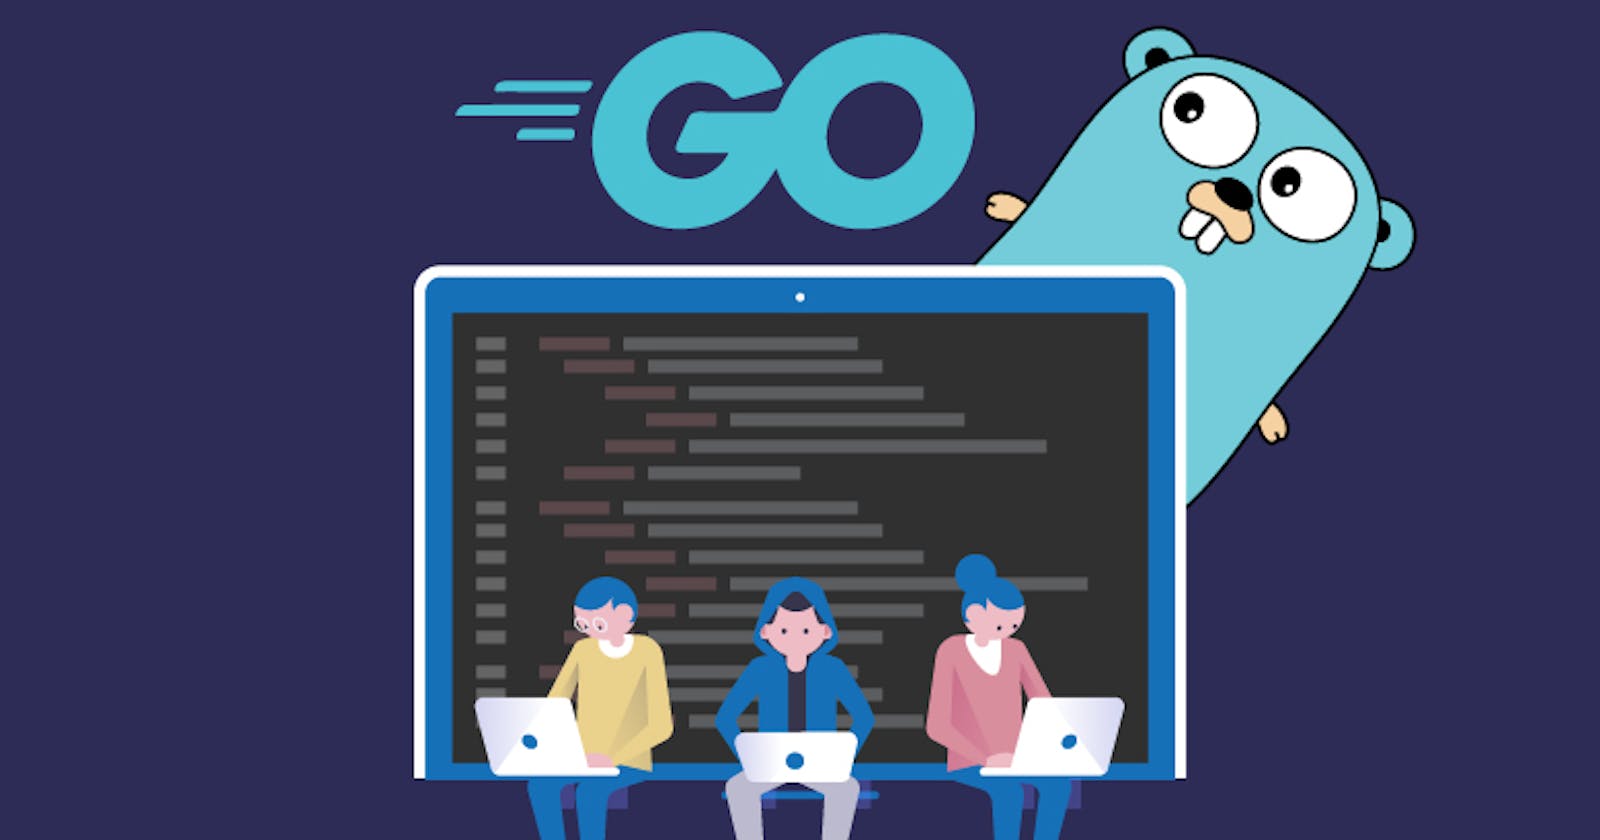 Go (Golang): Simplicity, Efficiency, and Scalability in Modern Development